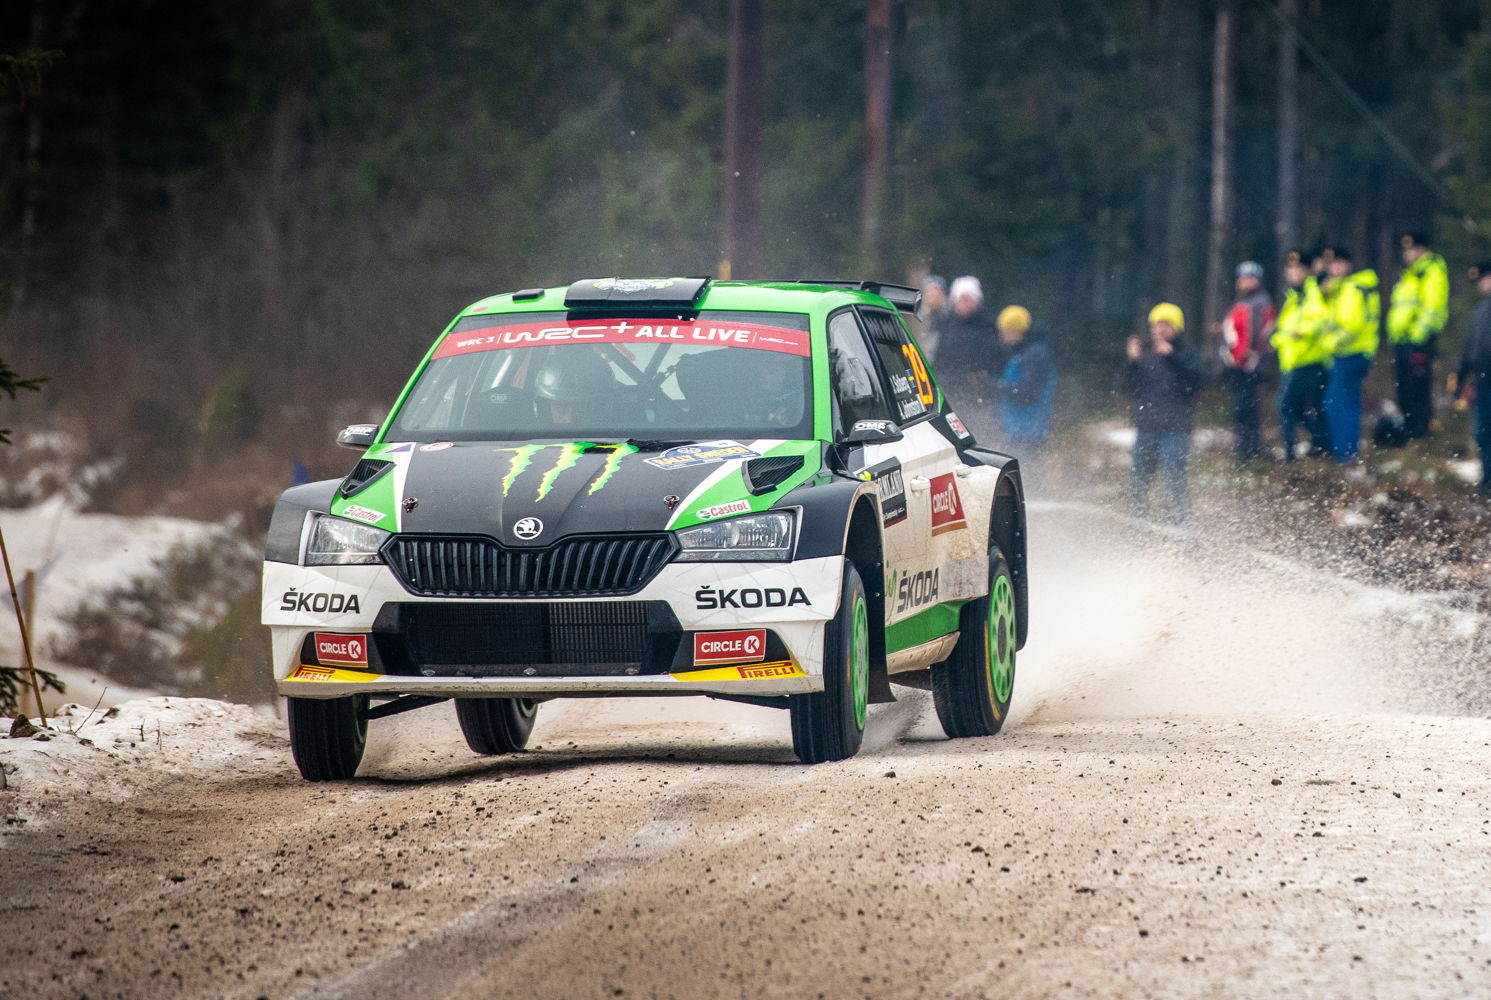 Innovations like four-wheel drive and the more than 280
horsepower strong direct injection turbo engine made the
ŠKODA FABIA Rally2 evo a category winner in the FIA
World Rally Championship.